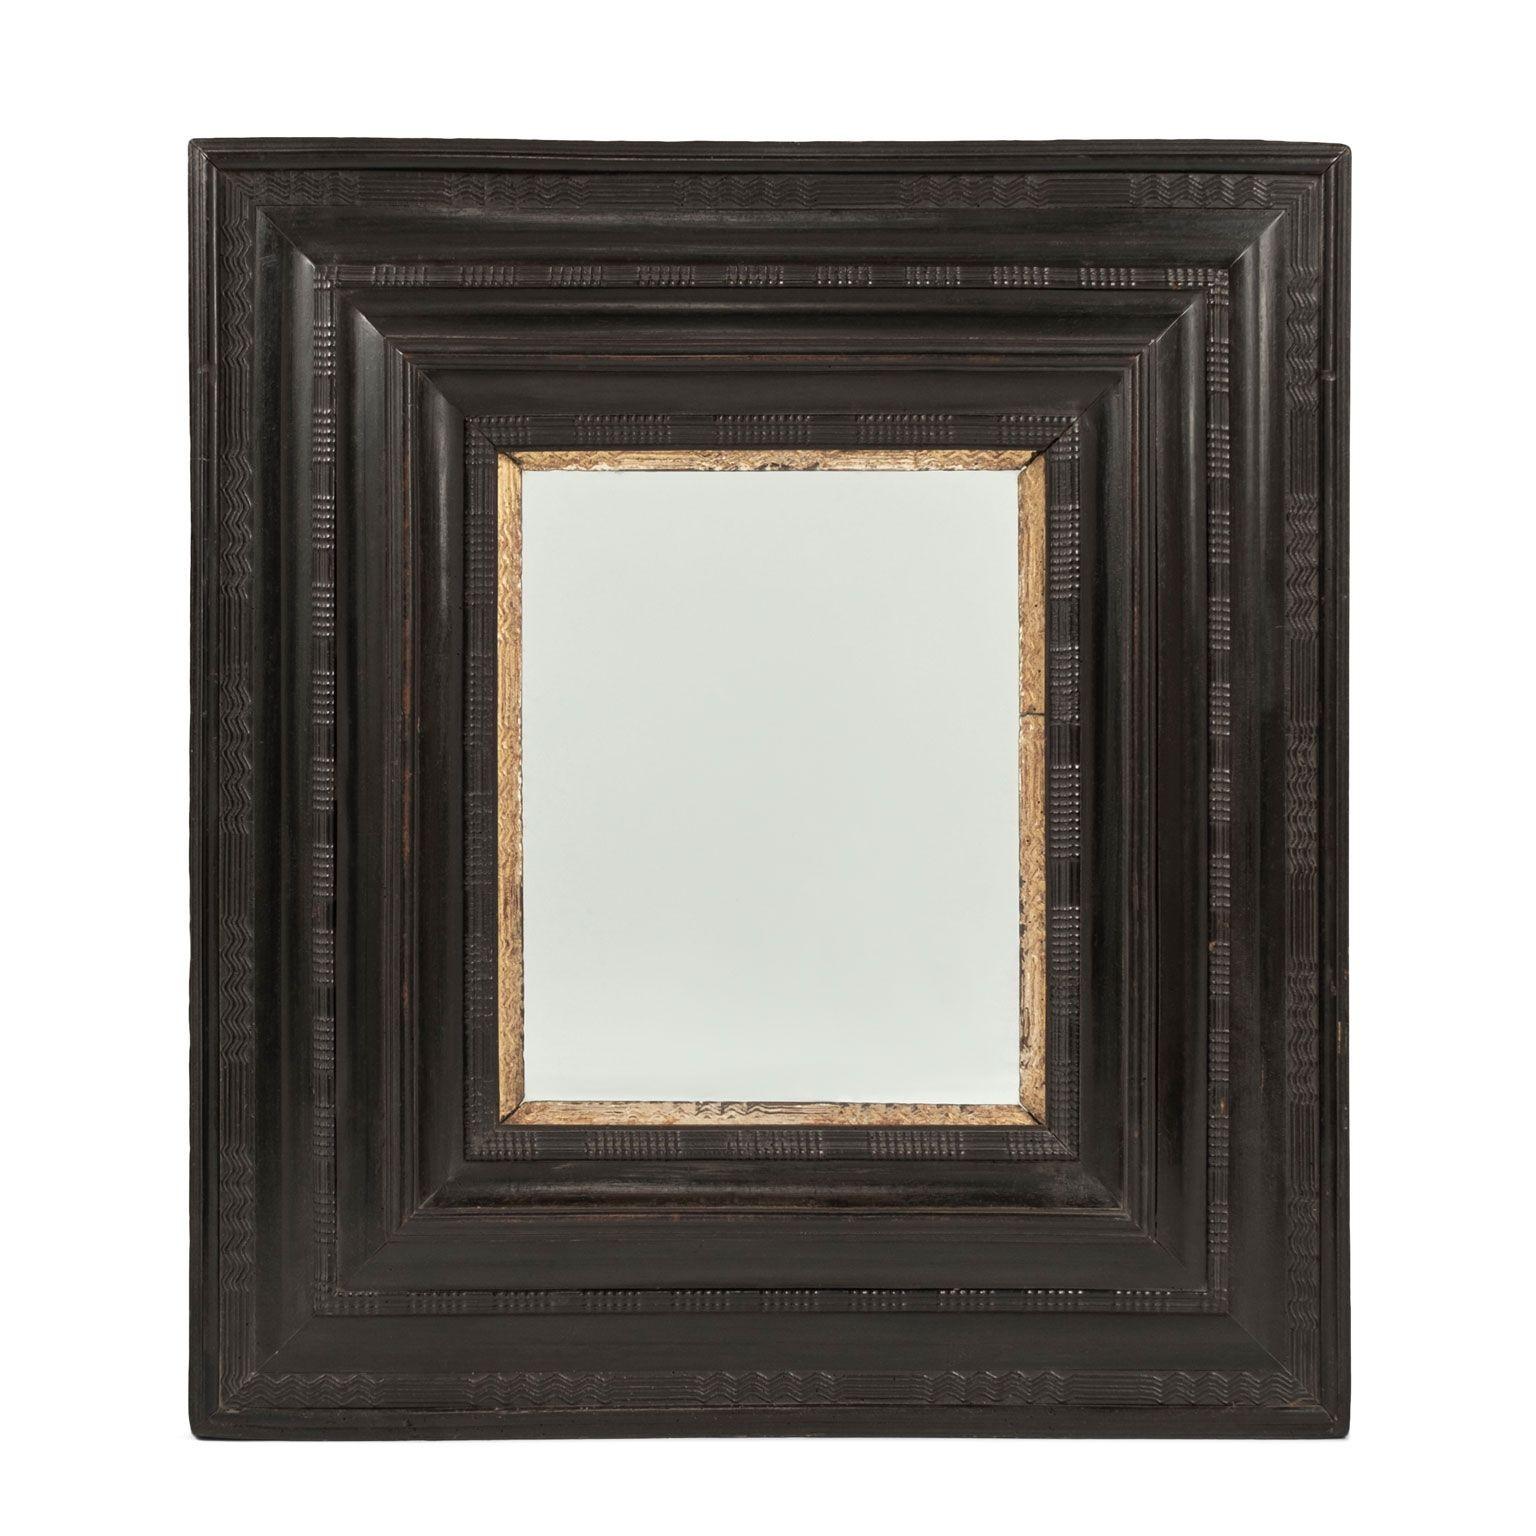 Italian ebonized and giltwood mirror dated to mid-18th century. Hand-carved ebonized frame with carved giltwood inner trim. Old mirror glass, but not original.